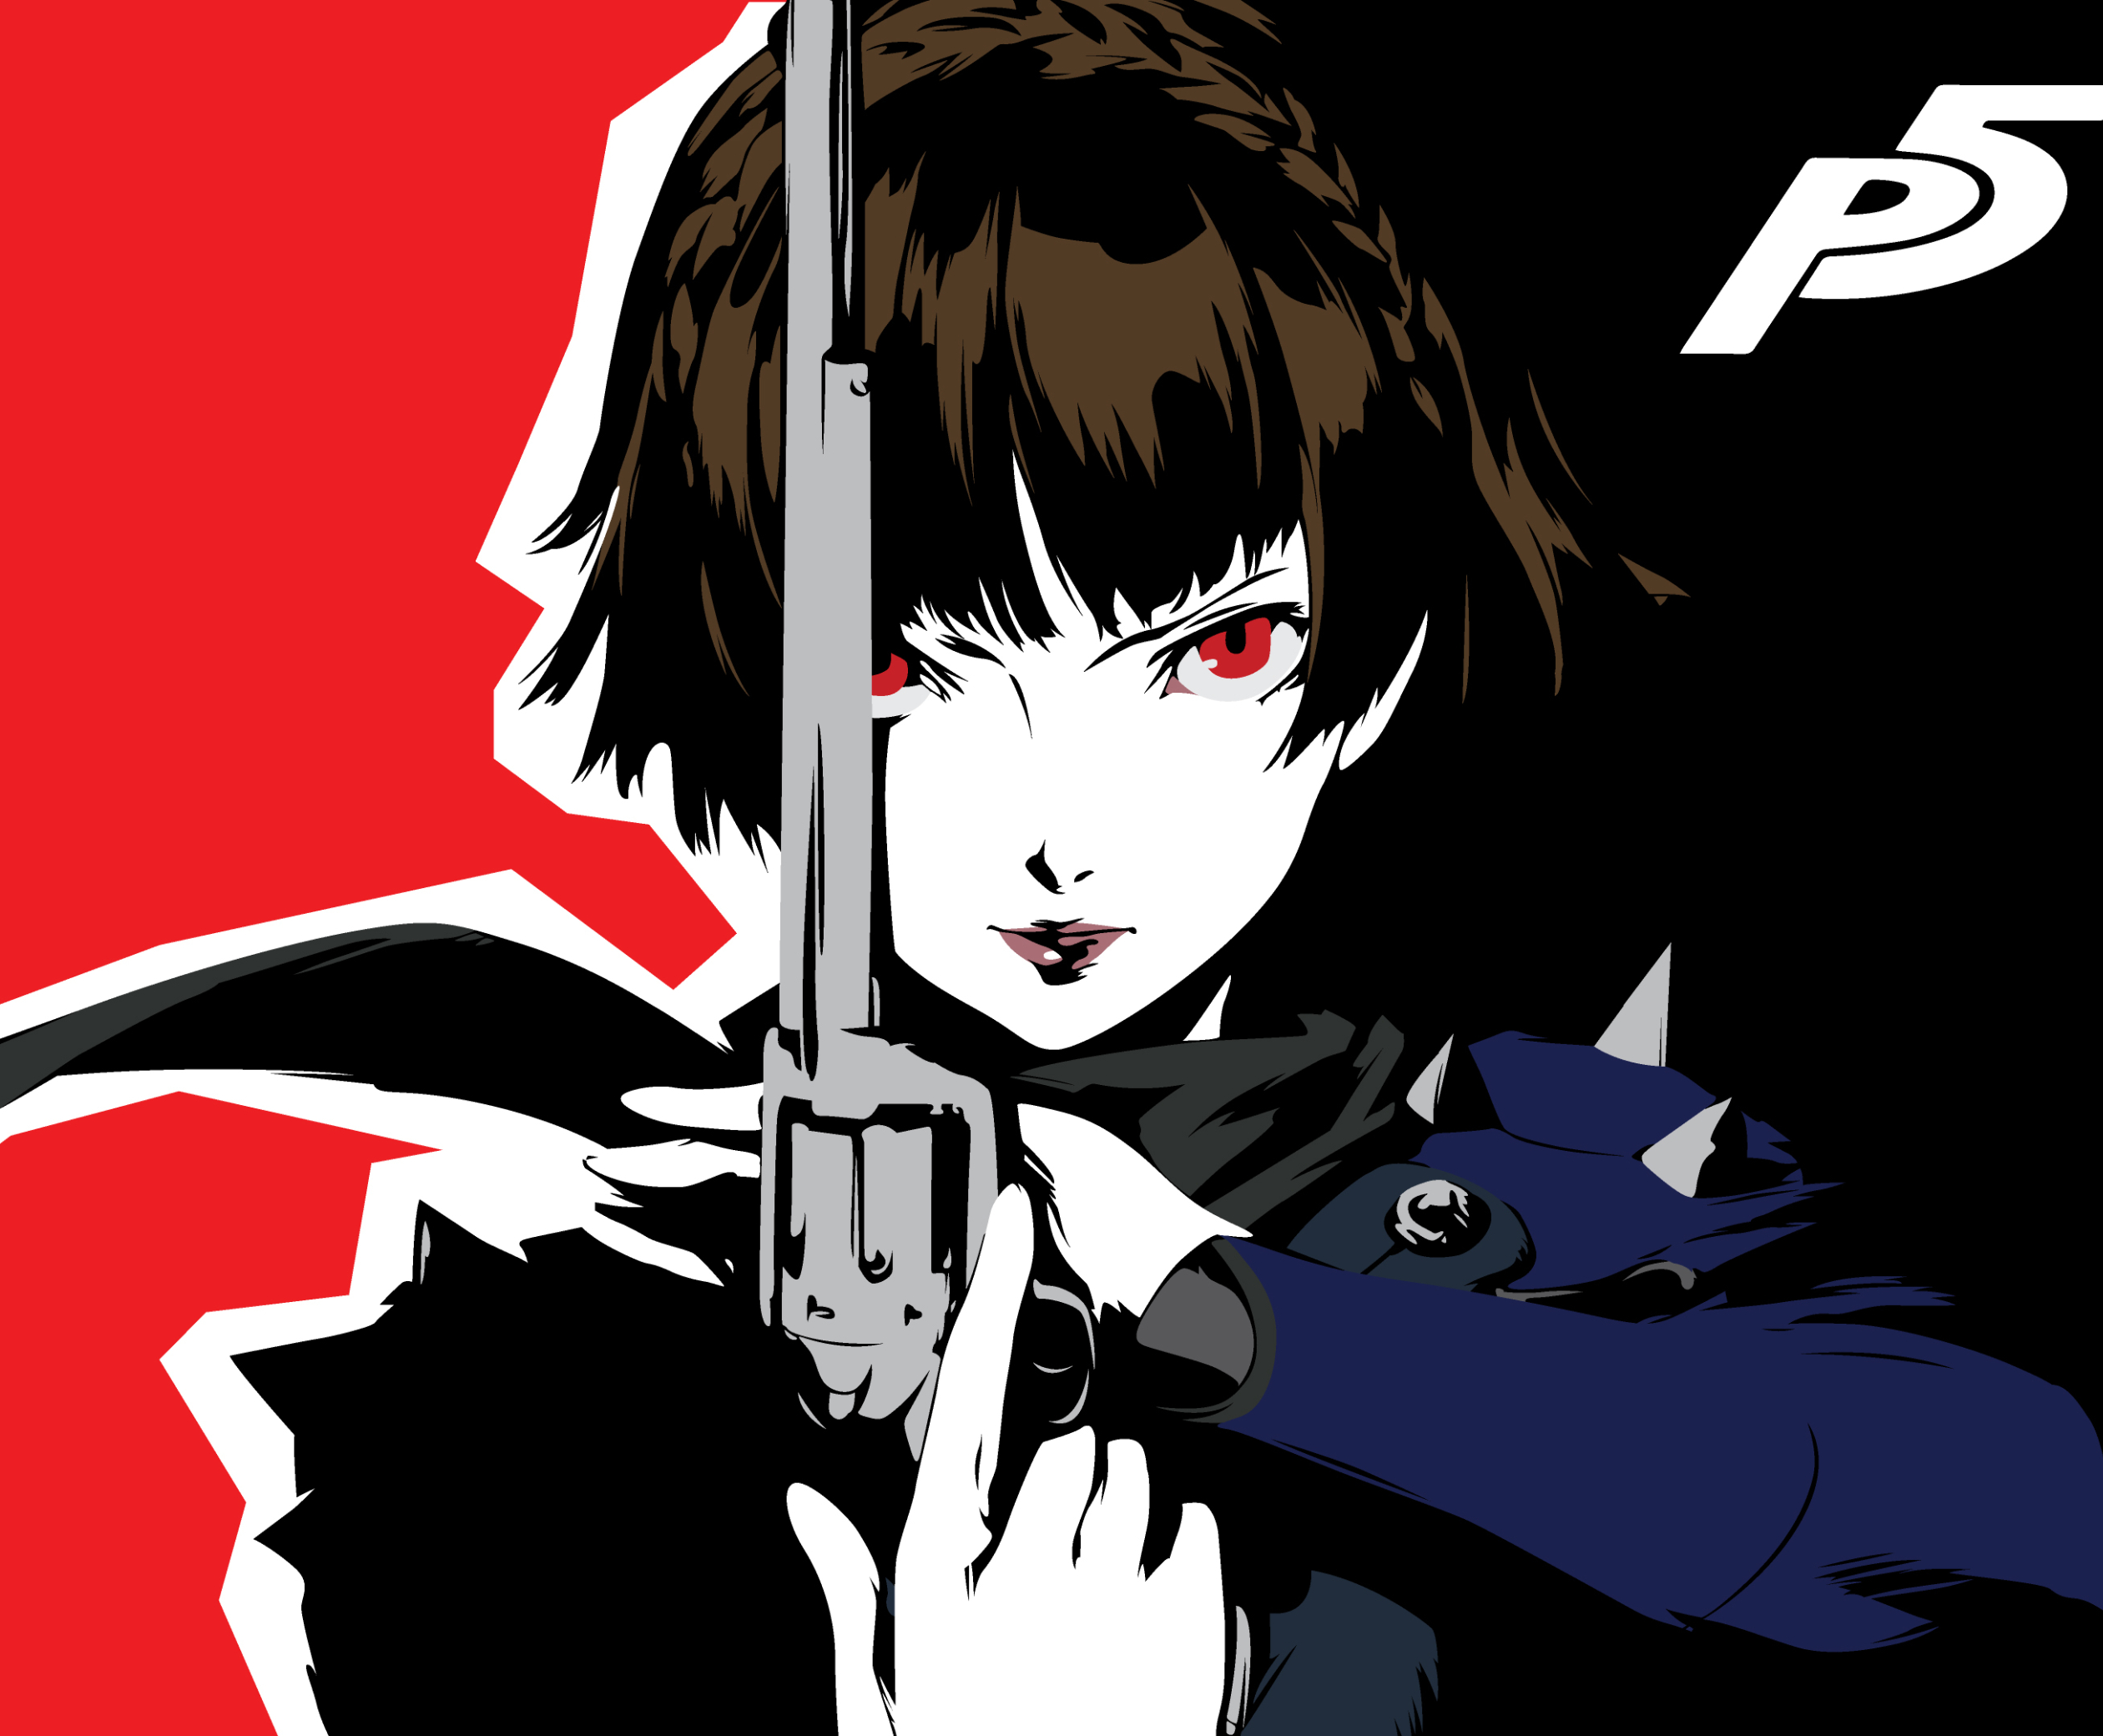 2520x2080 Resolution Queen Persona 5 Anime Girl 4K 2520x2080 Resolution ...